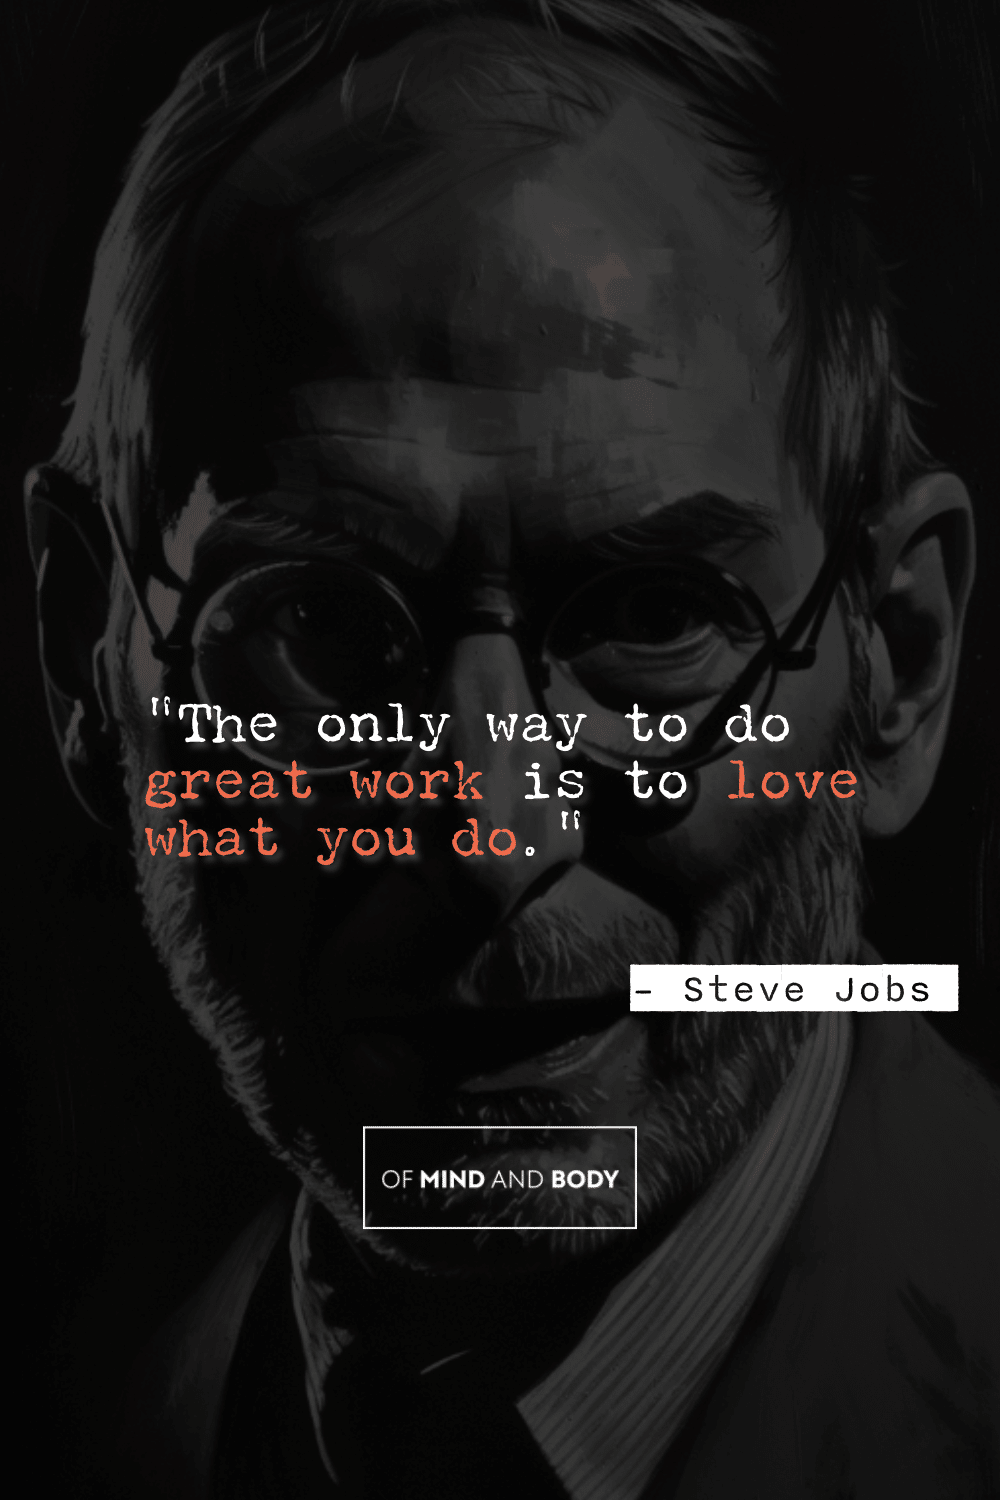 Quotes on Self Improvement - "The only way to do great work is to love what you do."